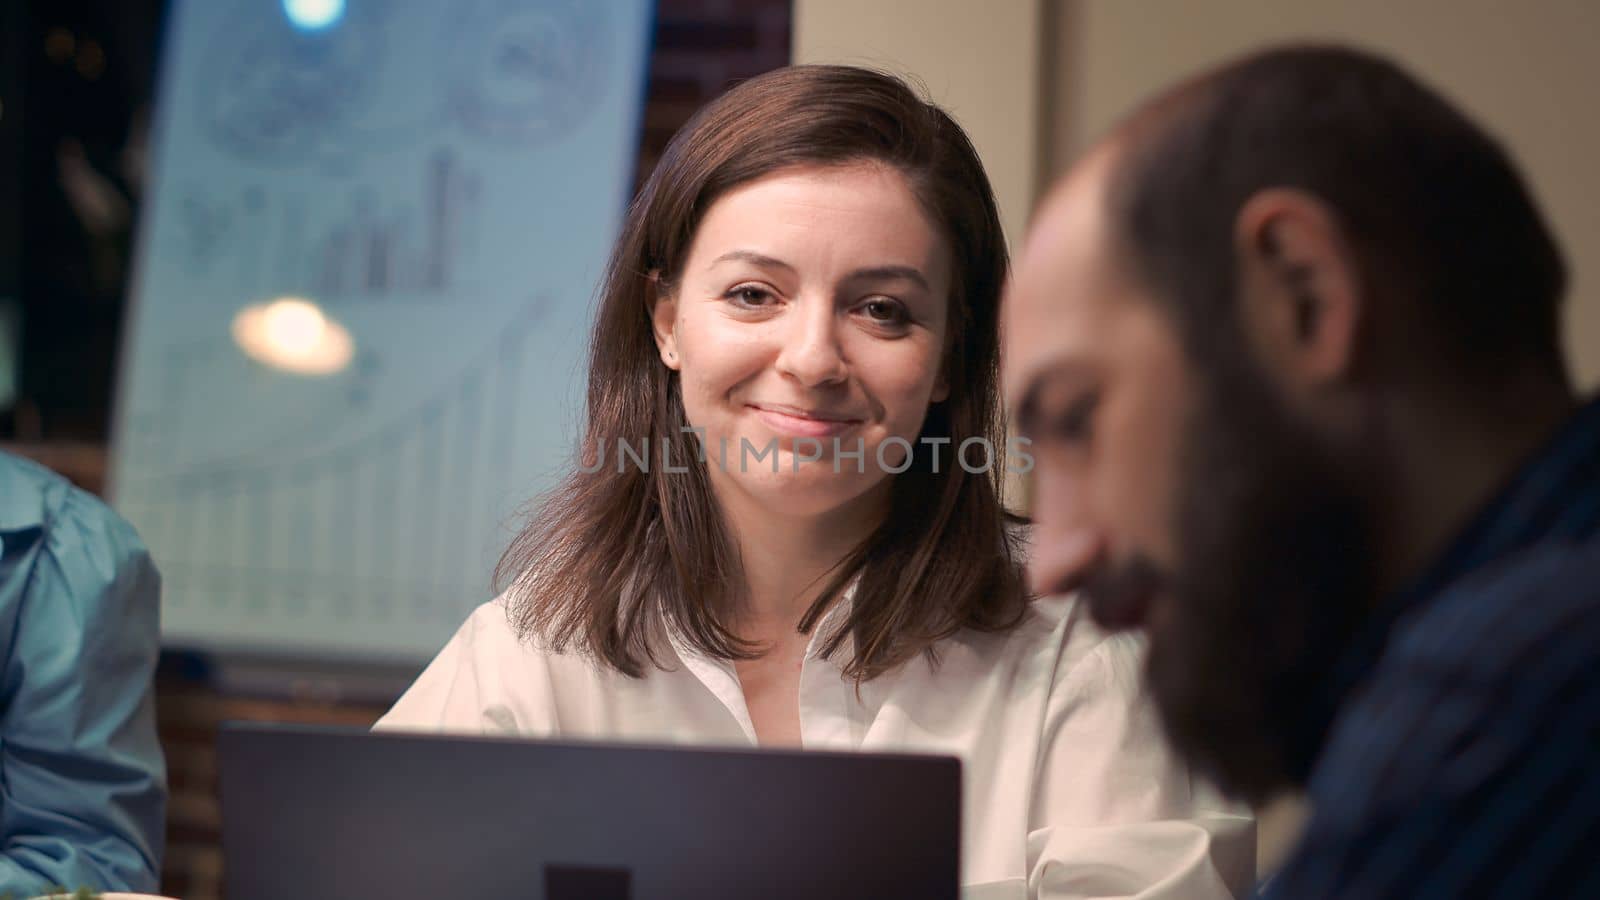 Woman talking with employee in business meeting, smiling portrait, slow motion. Colleagues discussion, brainstorming, communication in coworking space, office manager looking at camera. Handheld shot.